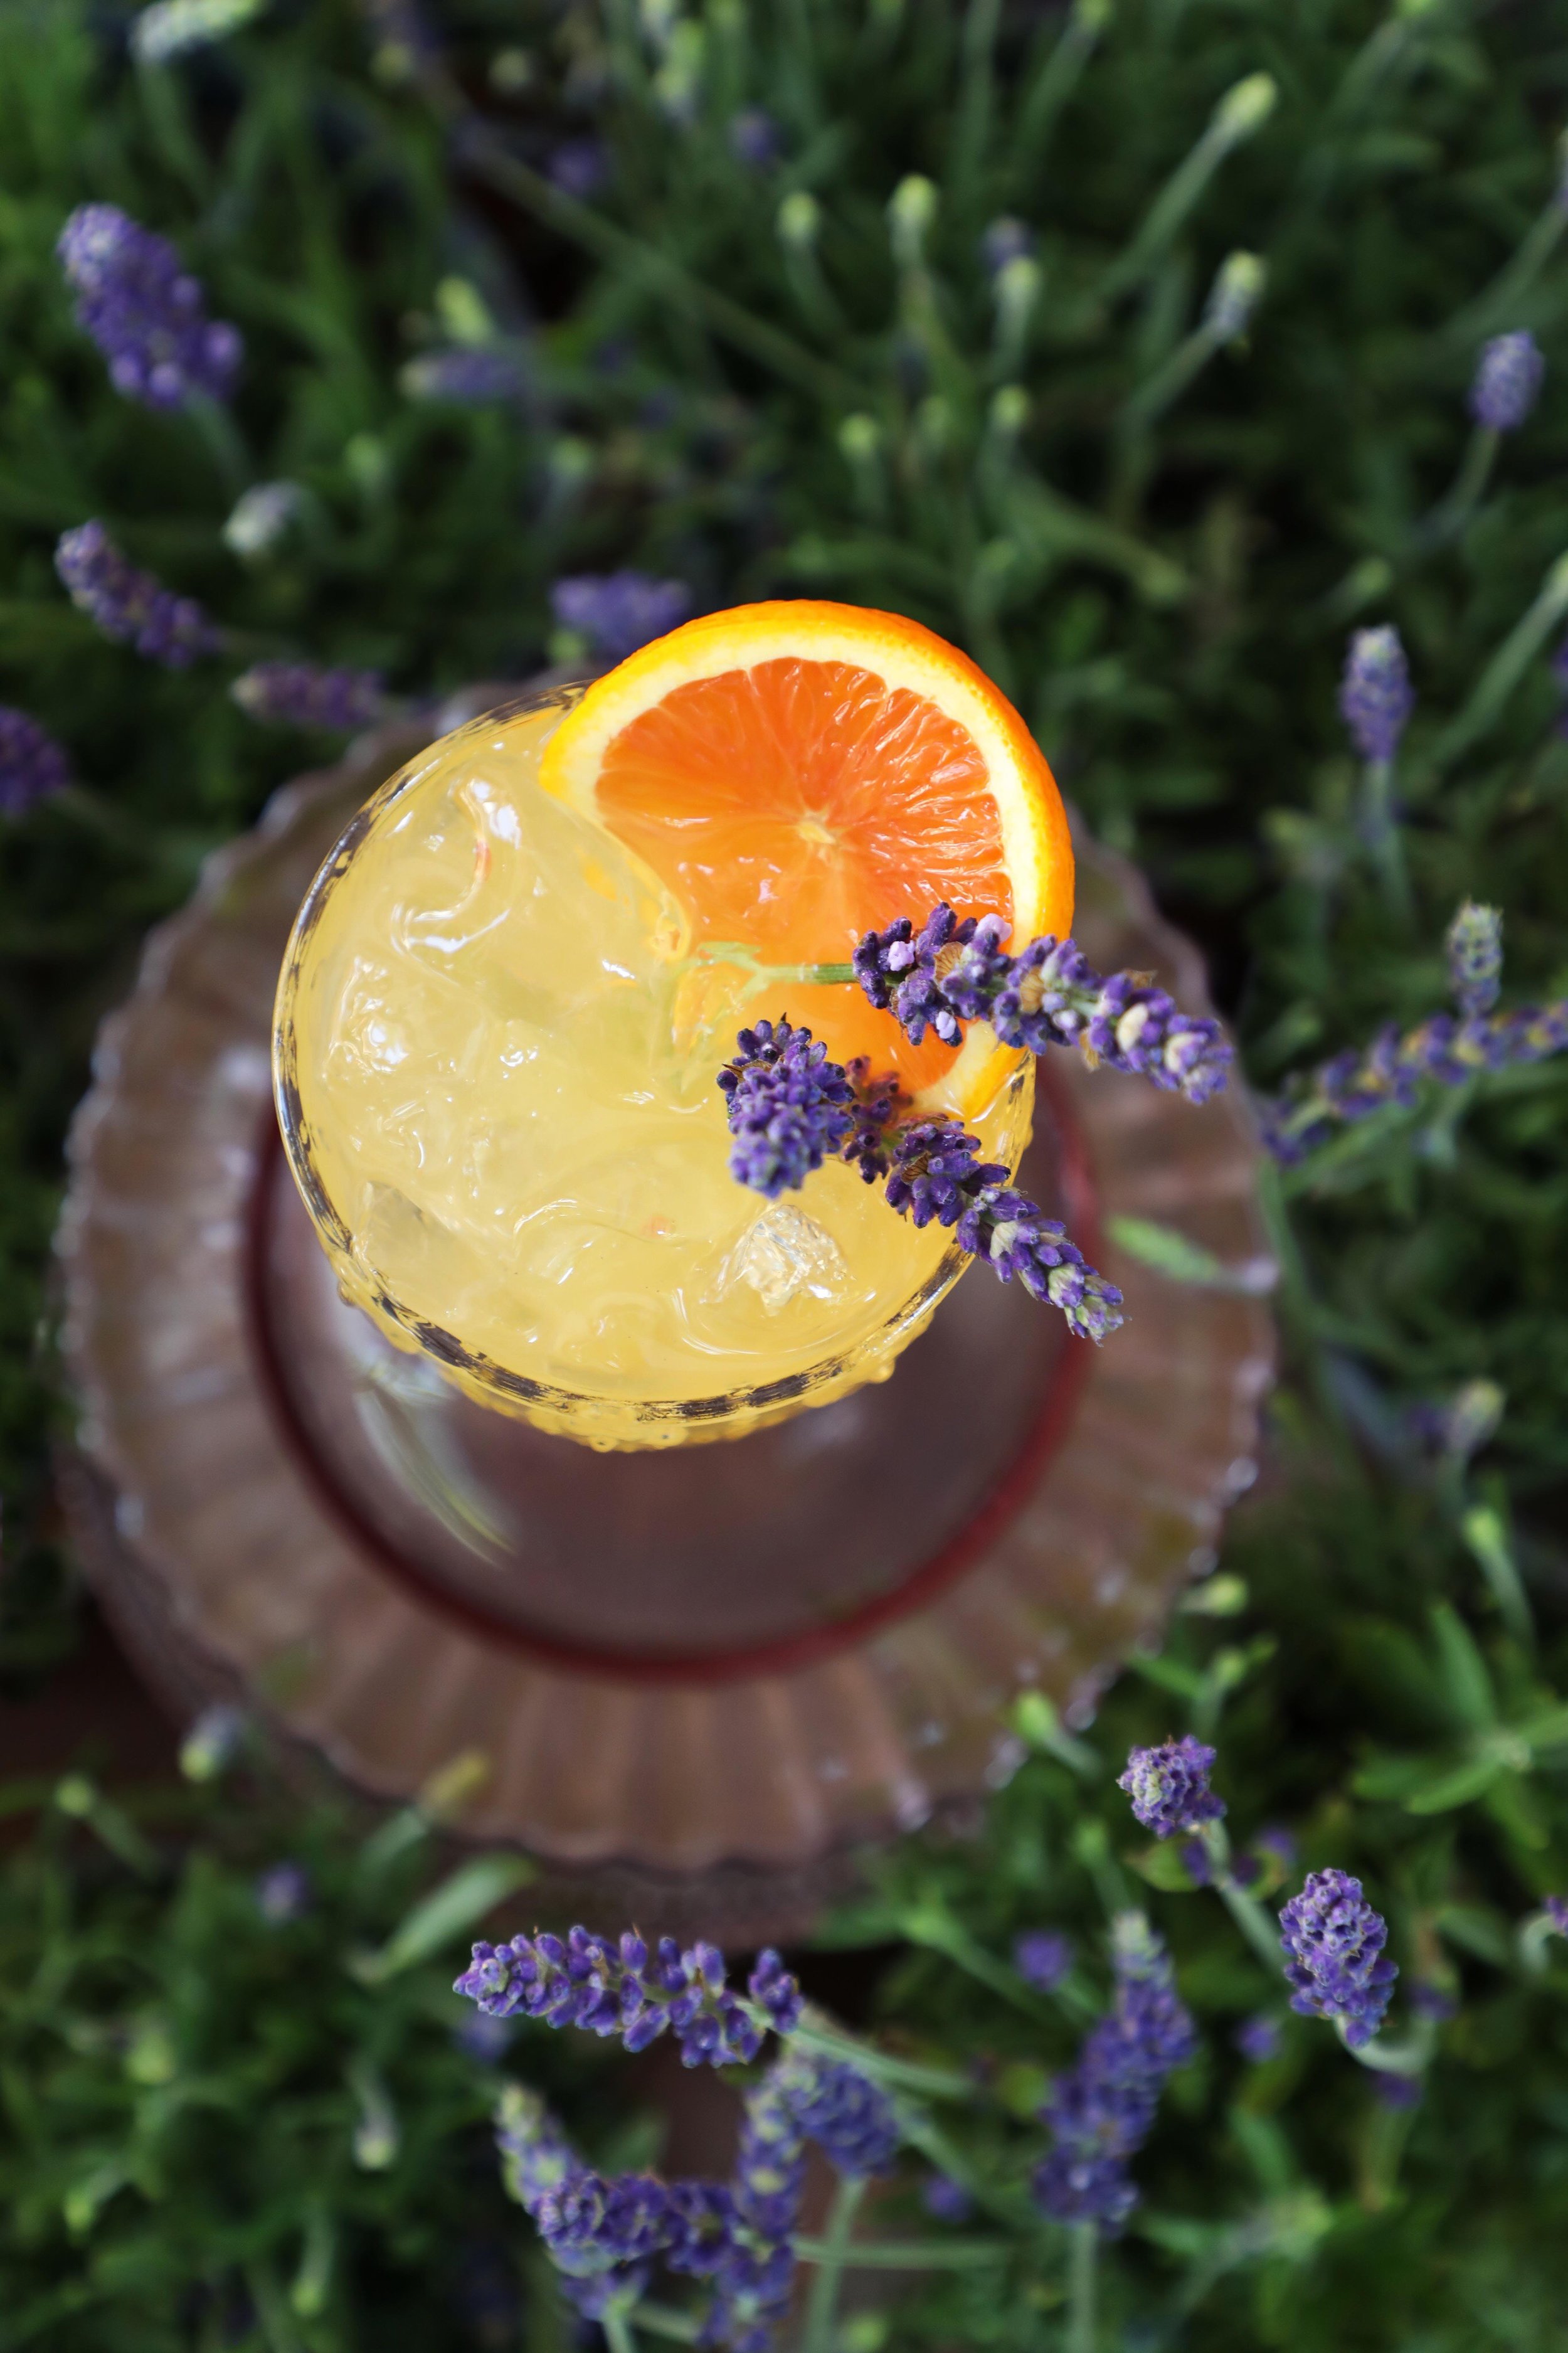 Lavender Tequila Sunrise made with Exotico Tequila Blanco, fresh orange juice, and a lavender-infused grenadine | drinkingwithchickens.com